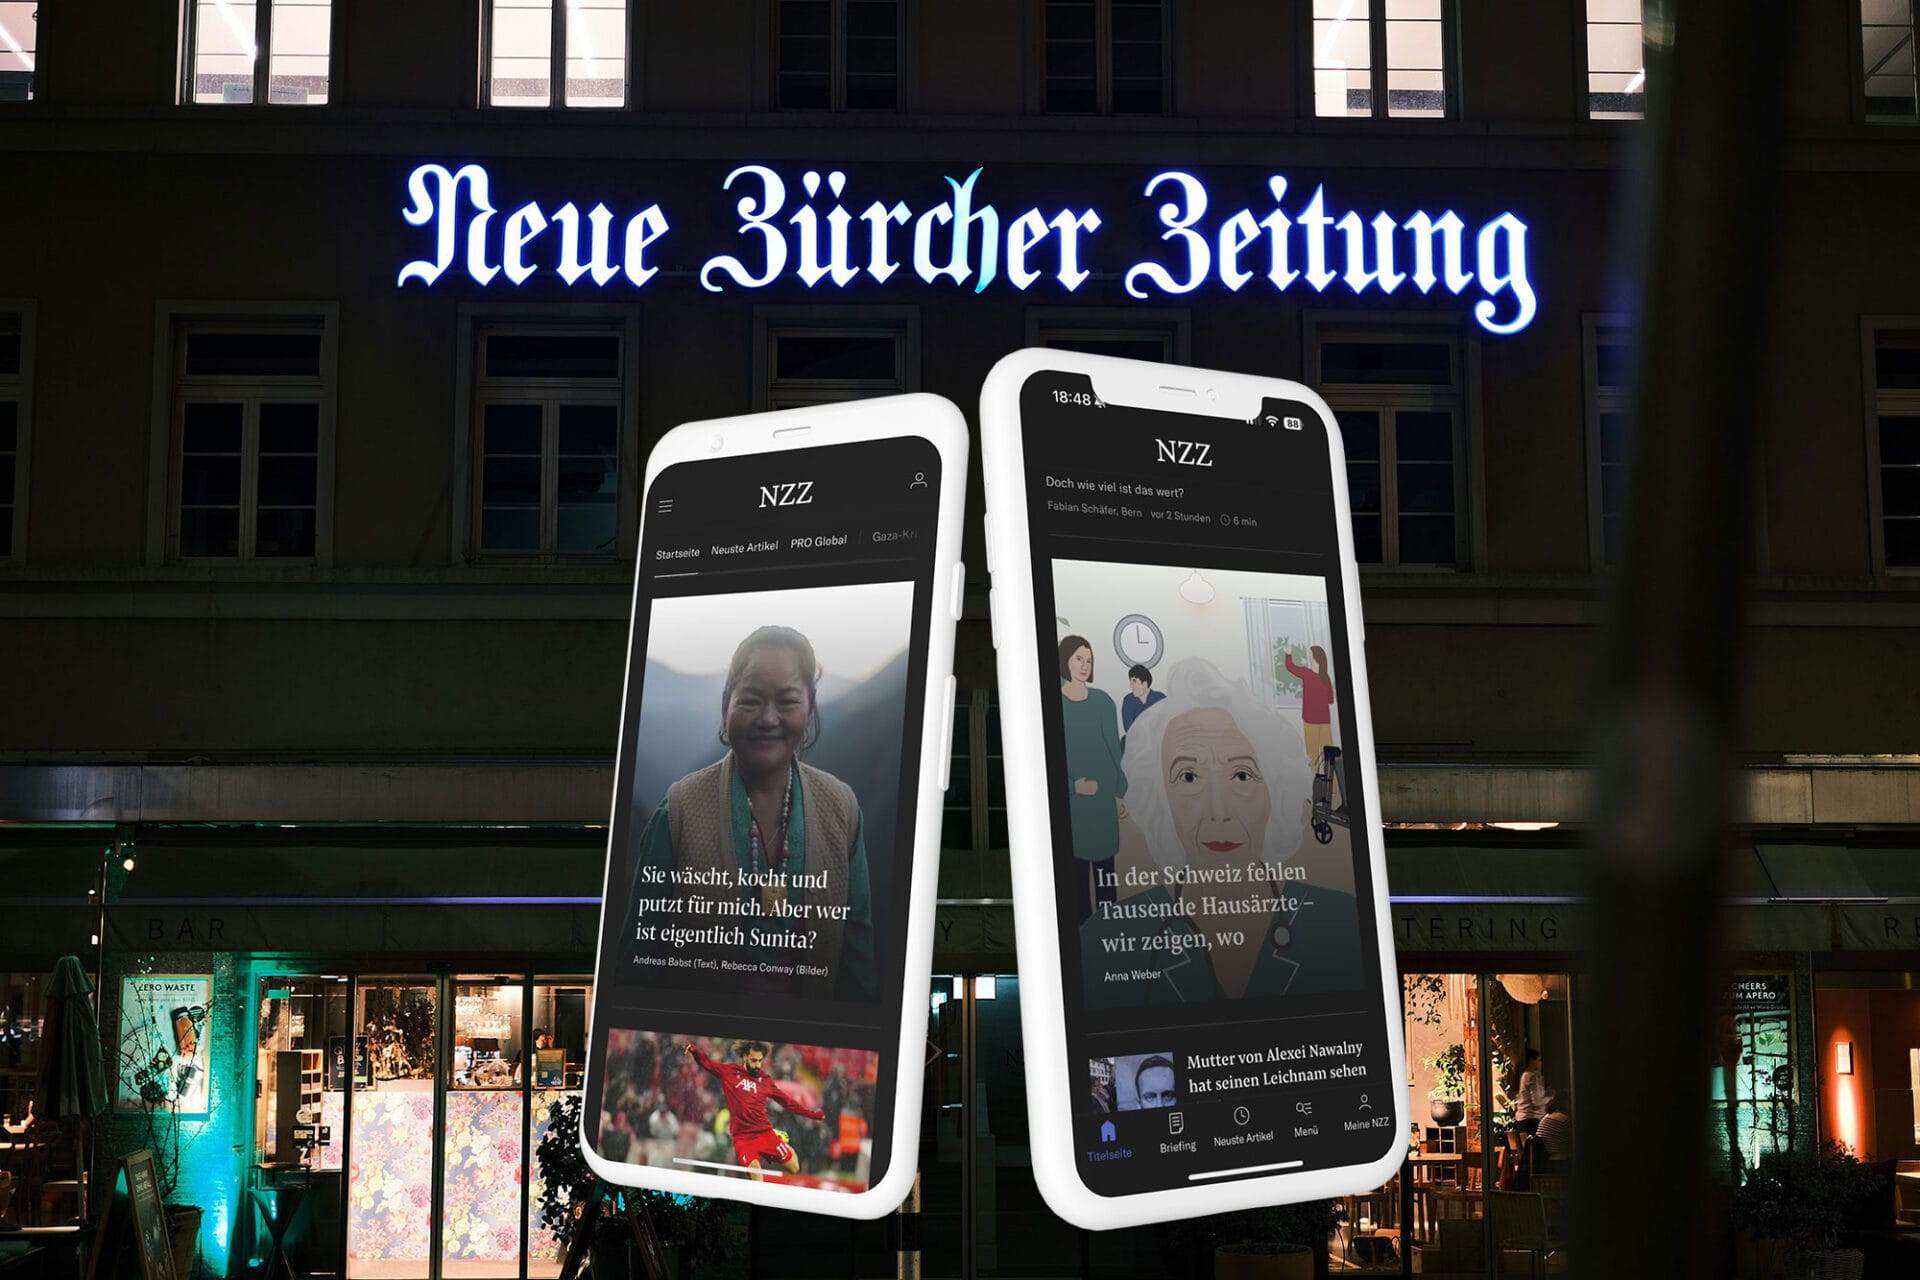 Neue Zürcher Zeitung building with two mobile devices displaying the new font-page concept